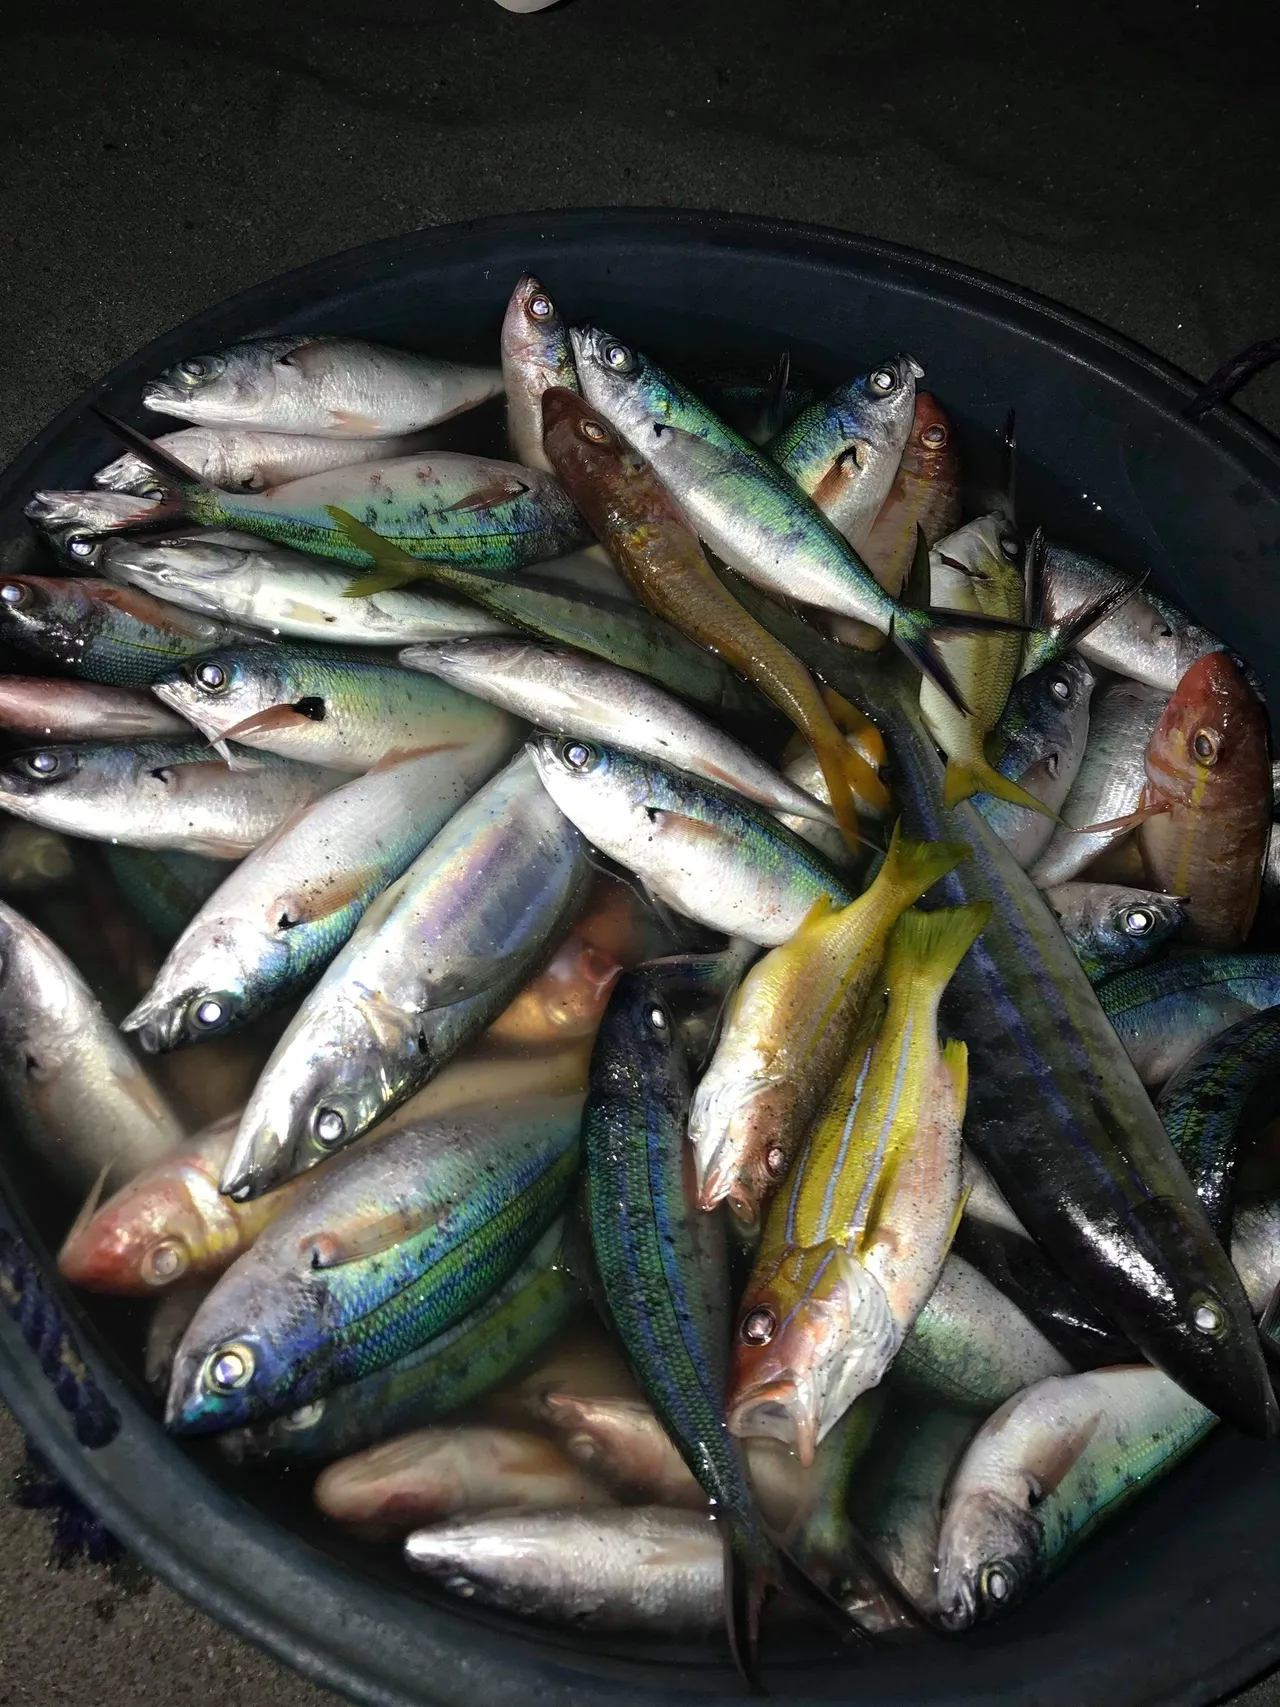 A bowl of fish is full of colorful fish.